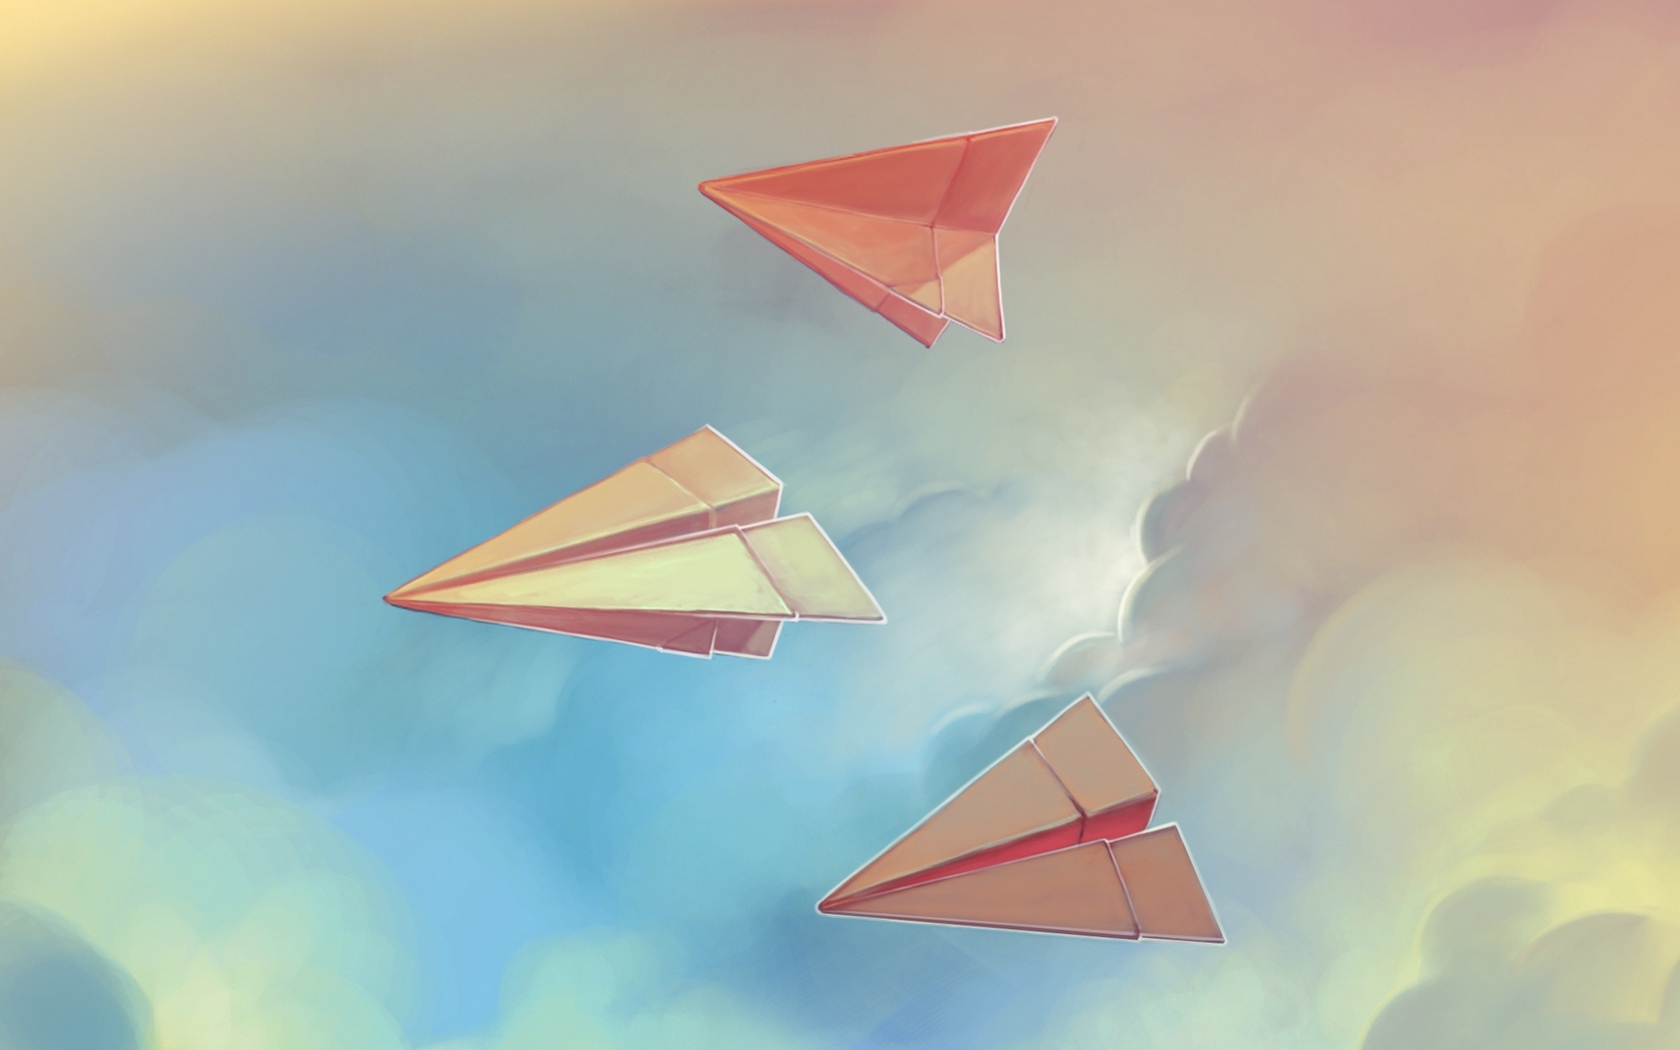 Wallpaper Paper Airplanes, Sky, Flight - Paper Airplanes Background - HD Wallpaper 